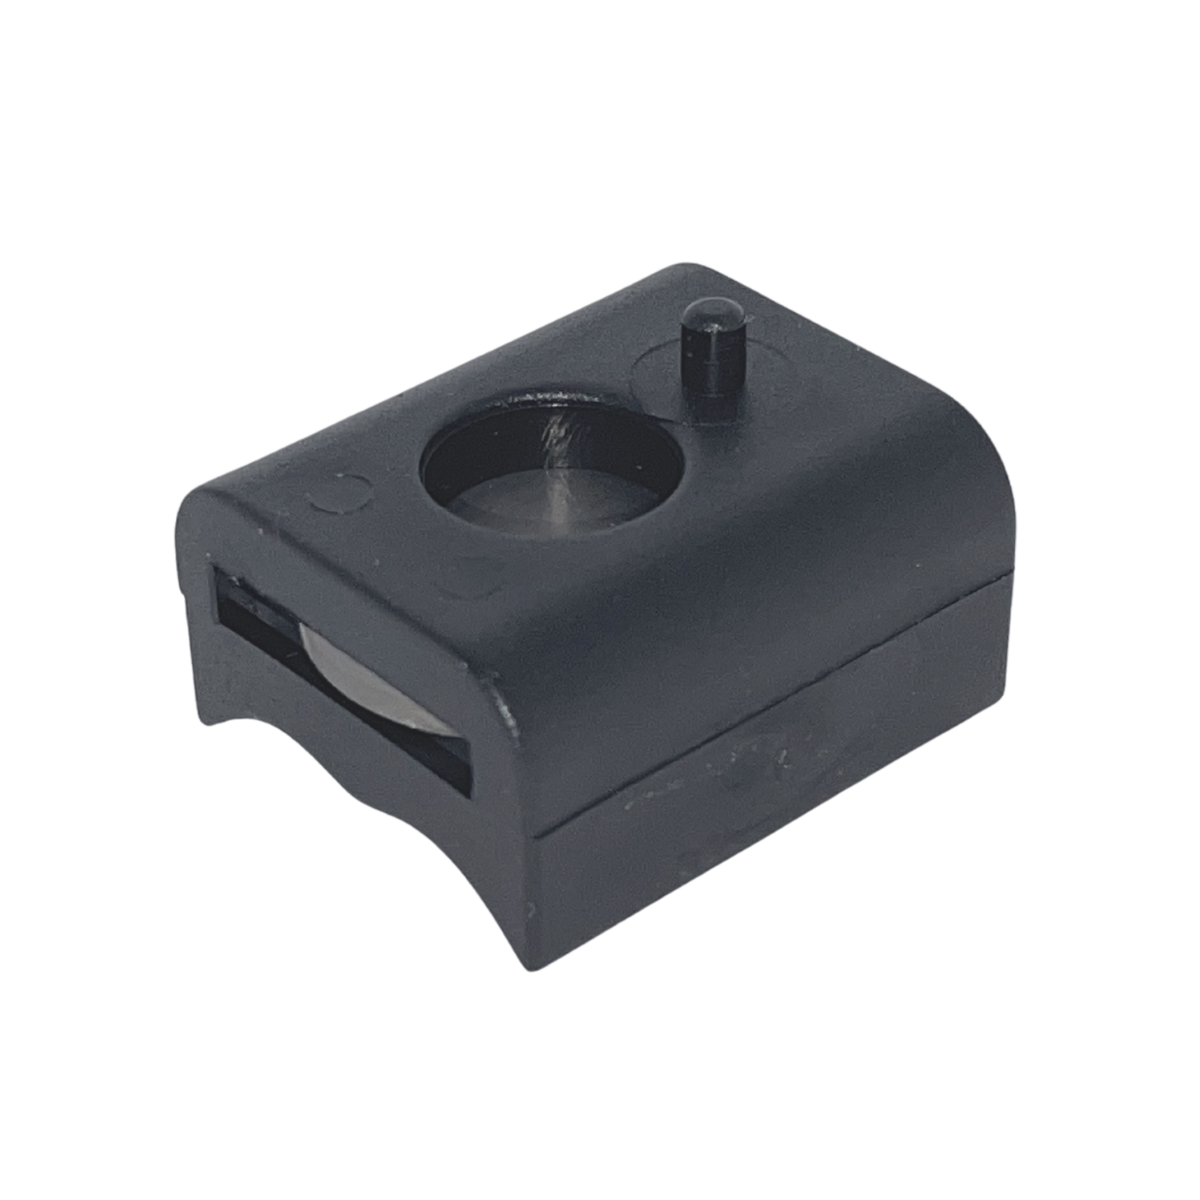 K&M plastic locking spacer (for distance pole)